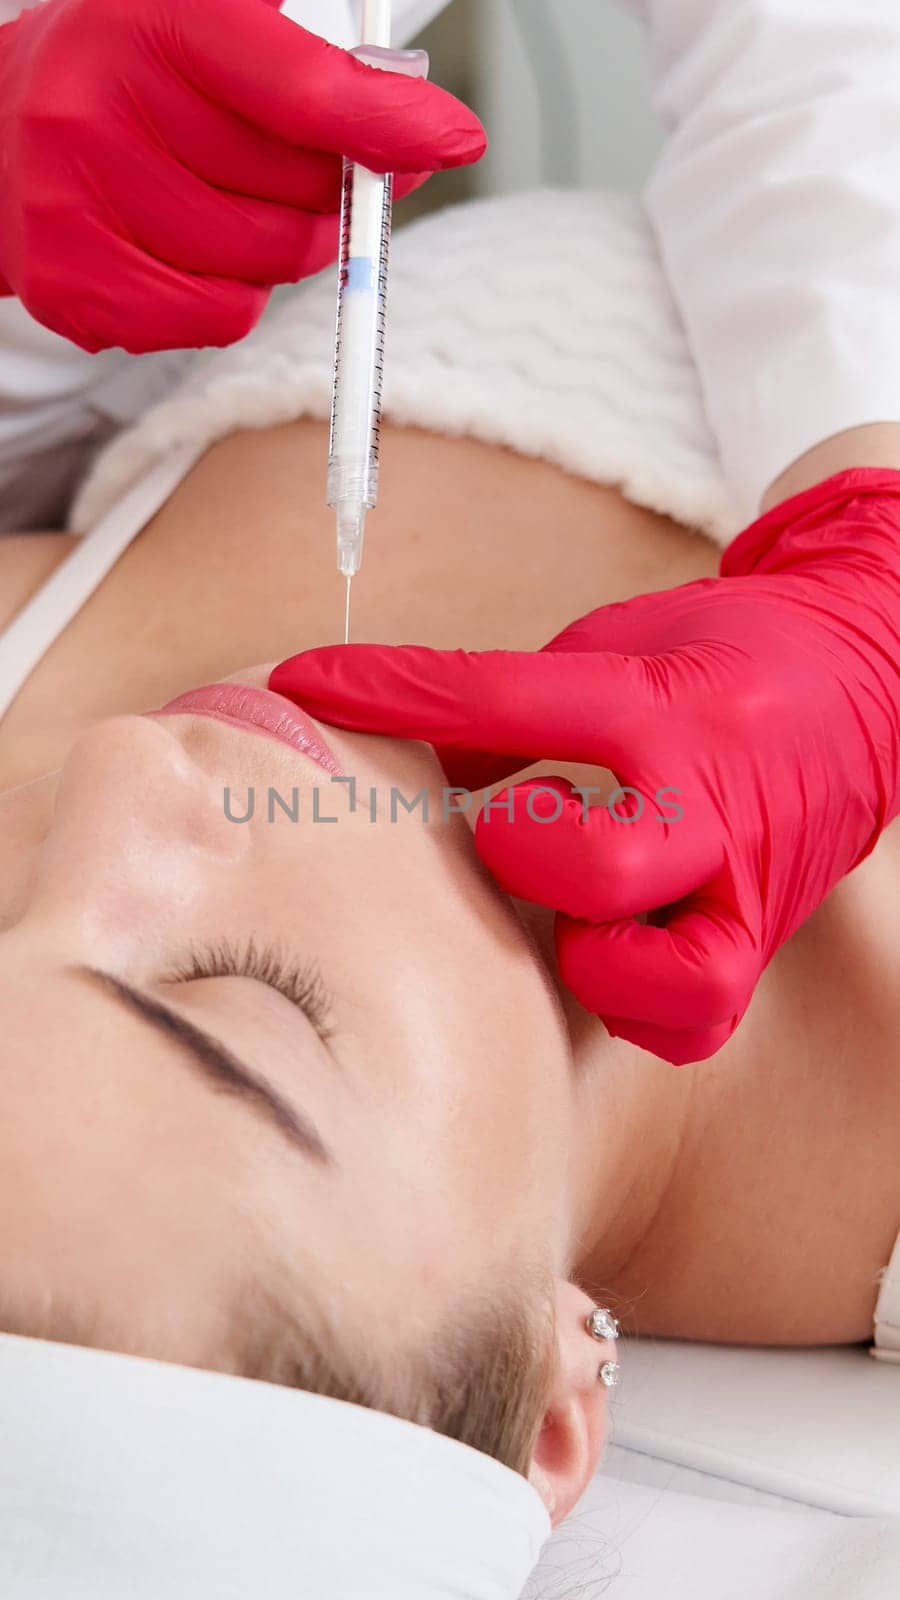 Beautician making injection in the chin with syringe in beauty salon. Cosmetic rejuvenating facial treatment